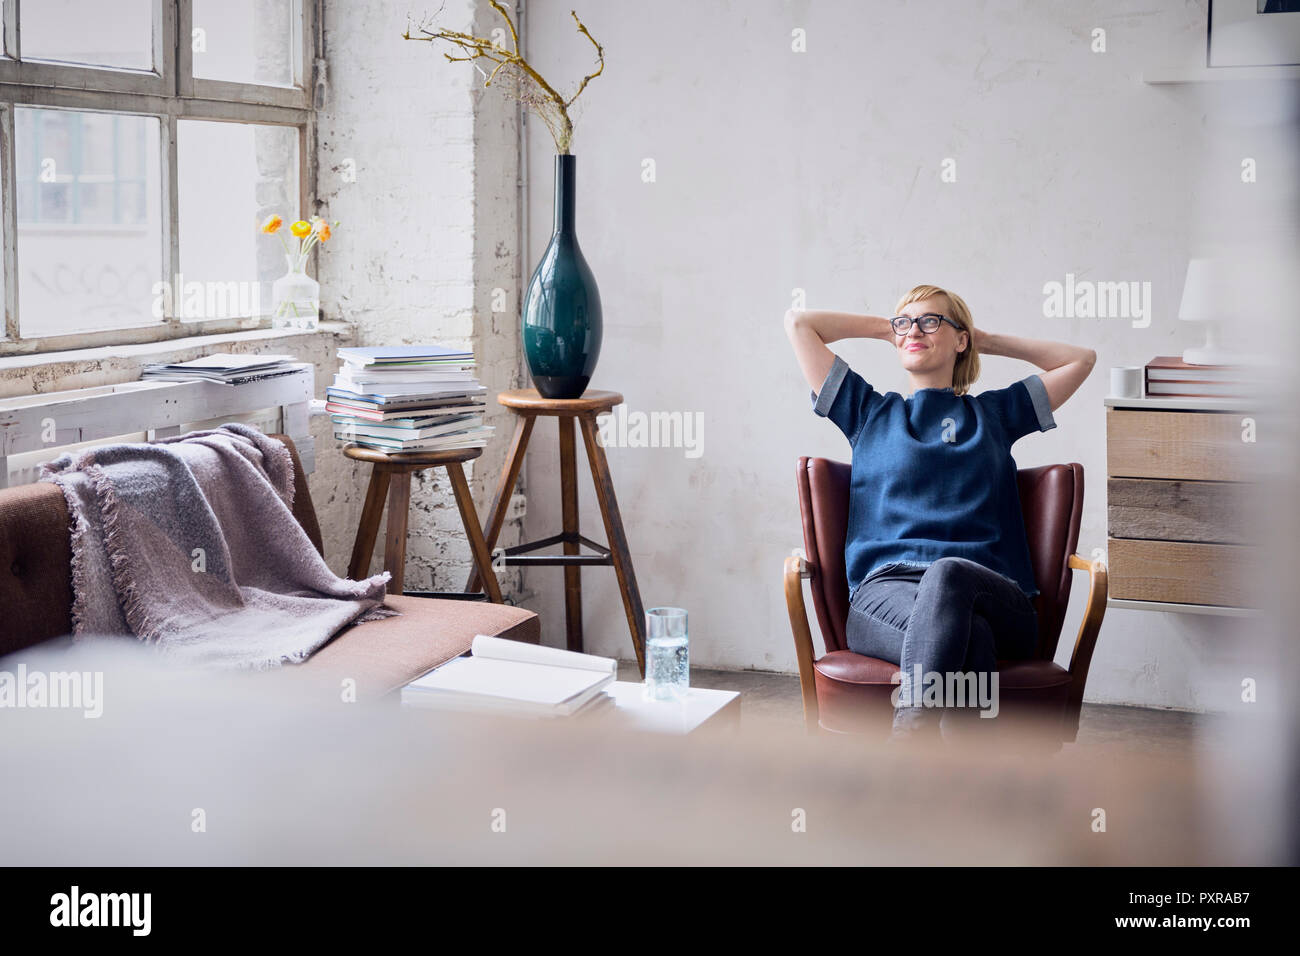 Smiling woman sitting on arm chair in loft looking through window Stock Photo